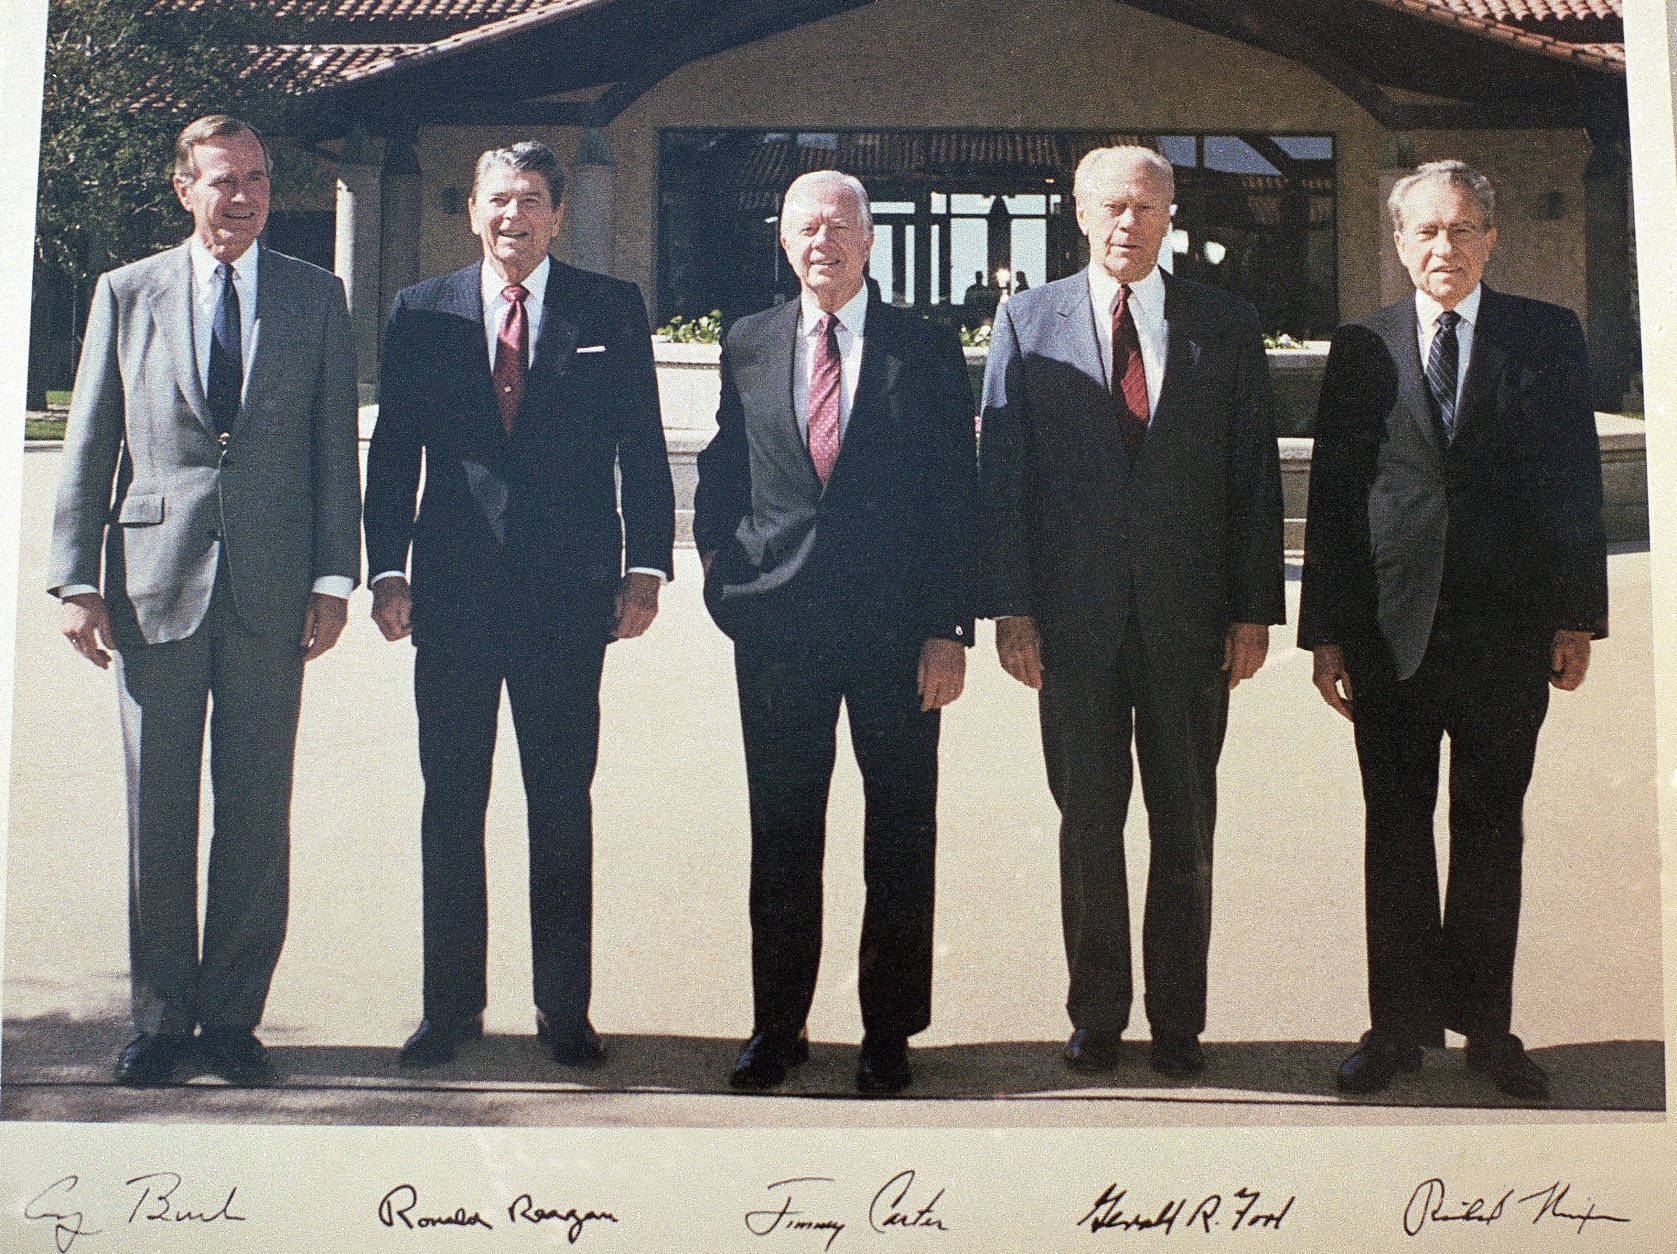 Former Presidents, from left, George H. W. Bush, Ronald Reagan, Jimmy Carter, Gerald Ford and Richard Nixon shown in the courtyard during the dedication of the Ronald Reagan Presidential Library in Simi Valley, Calif., on Nov. 4, 1991.  This photo was autographed by each of the heads of state. The five former presidents reportedly made a pact to sign only a limited number of photographs from the photo session in 1991, a deal that could net each up to $1.5 million. (AP Photo/Marcy Nighswander)